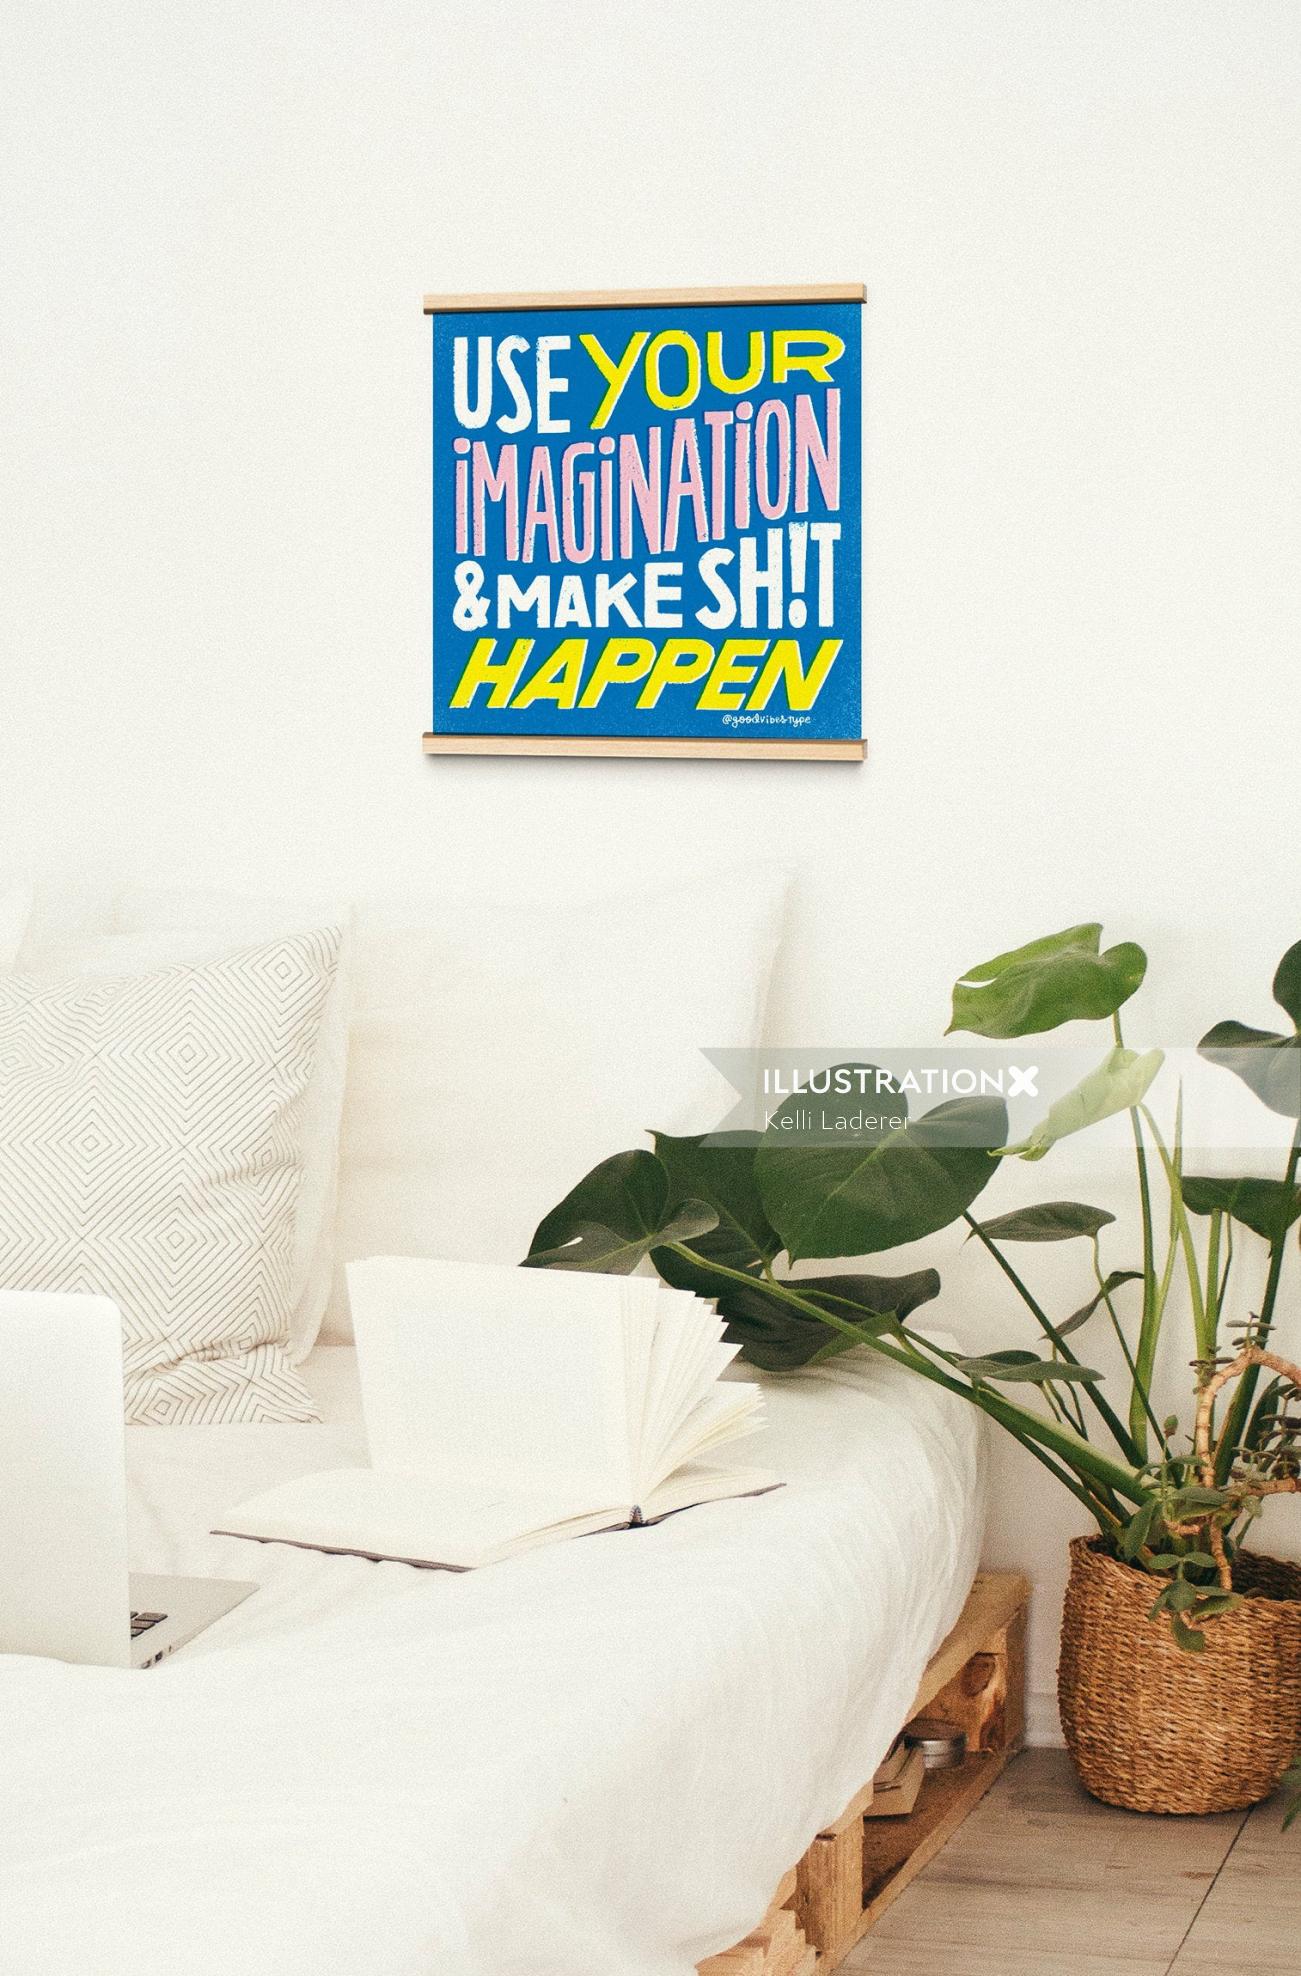 Use your imagination and make shit happen wall decor